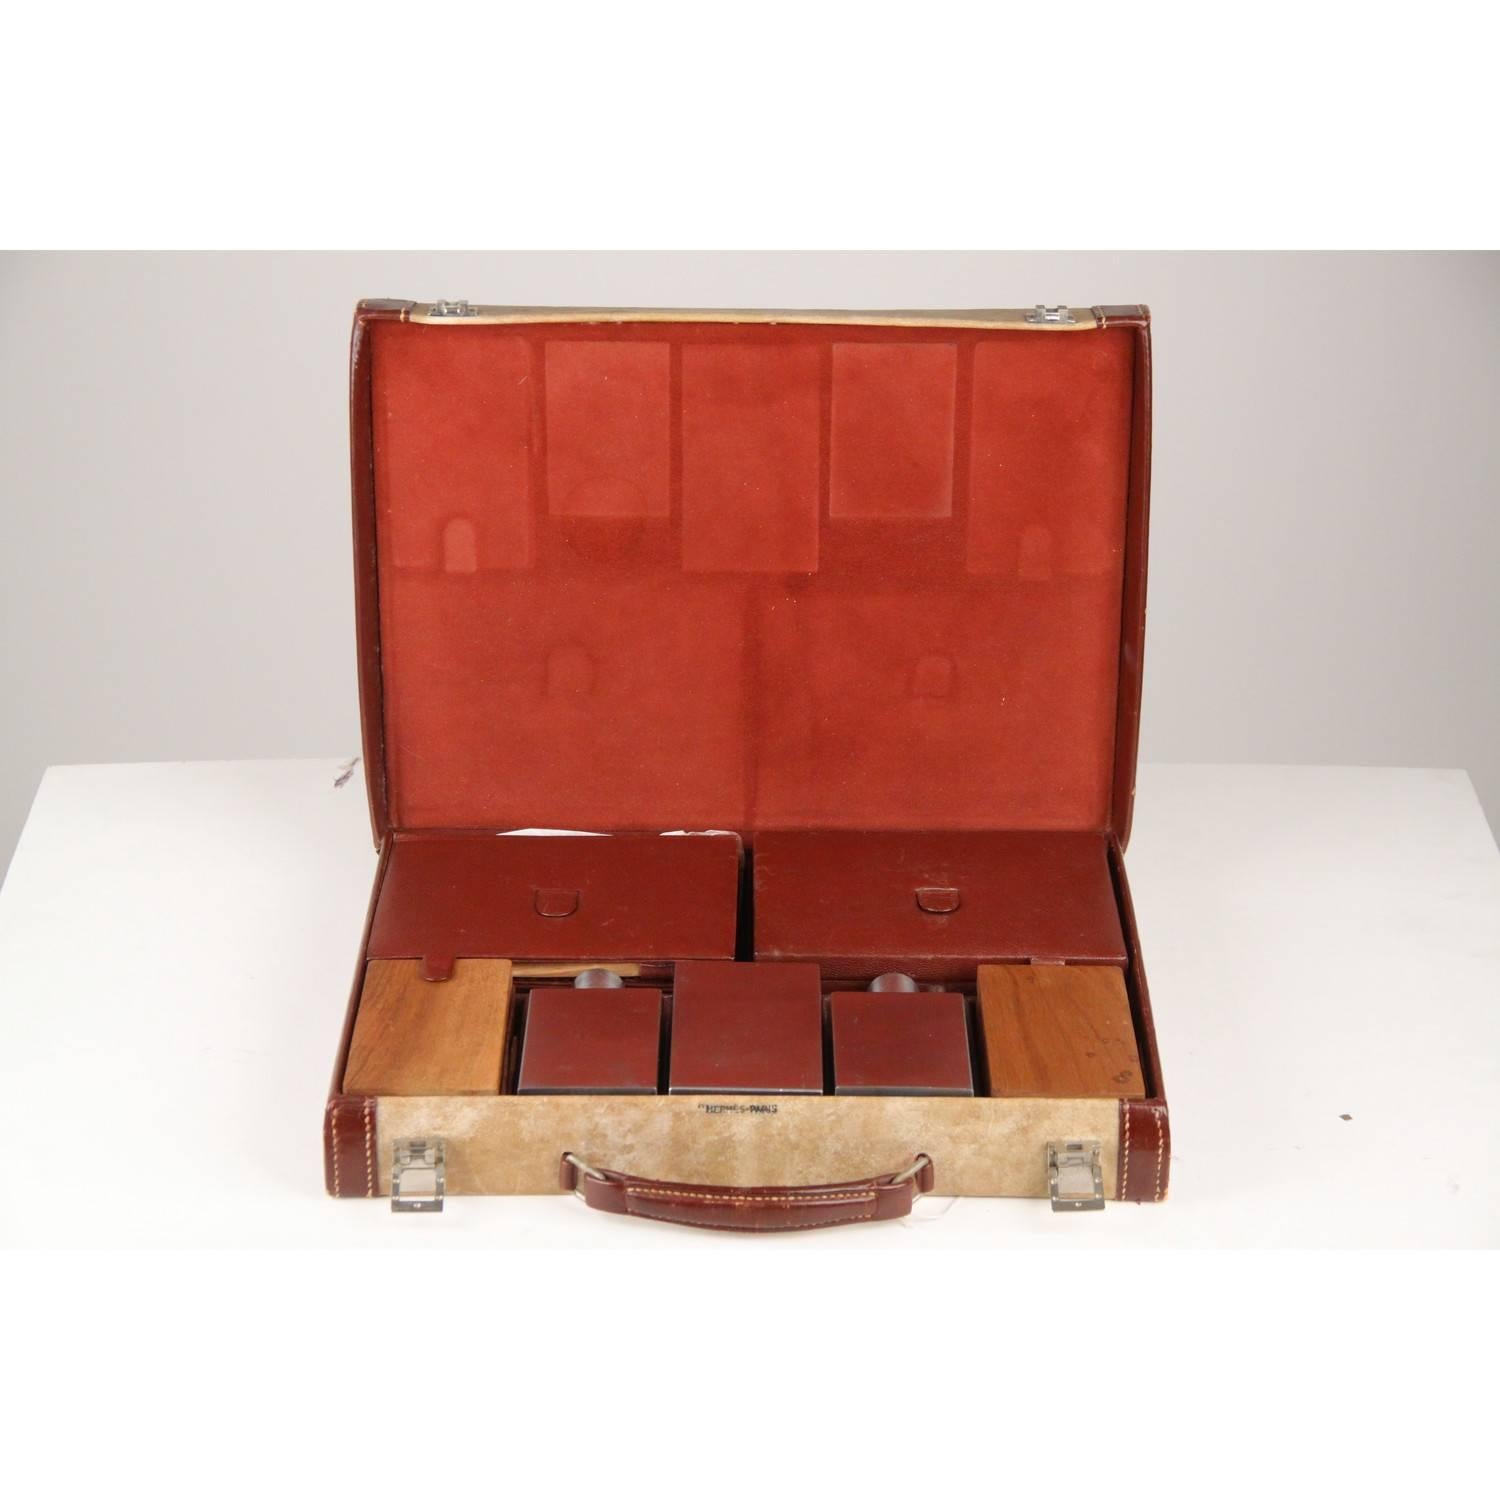 Women's or Men's Hermes Vintage Leather Travel Grooming Set with Toiletry Accessories